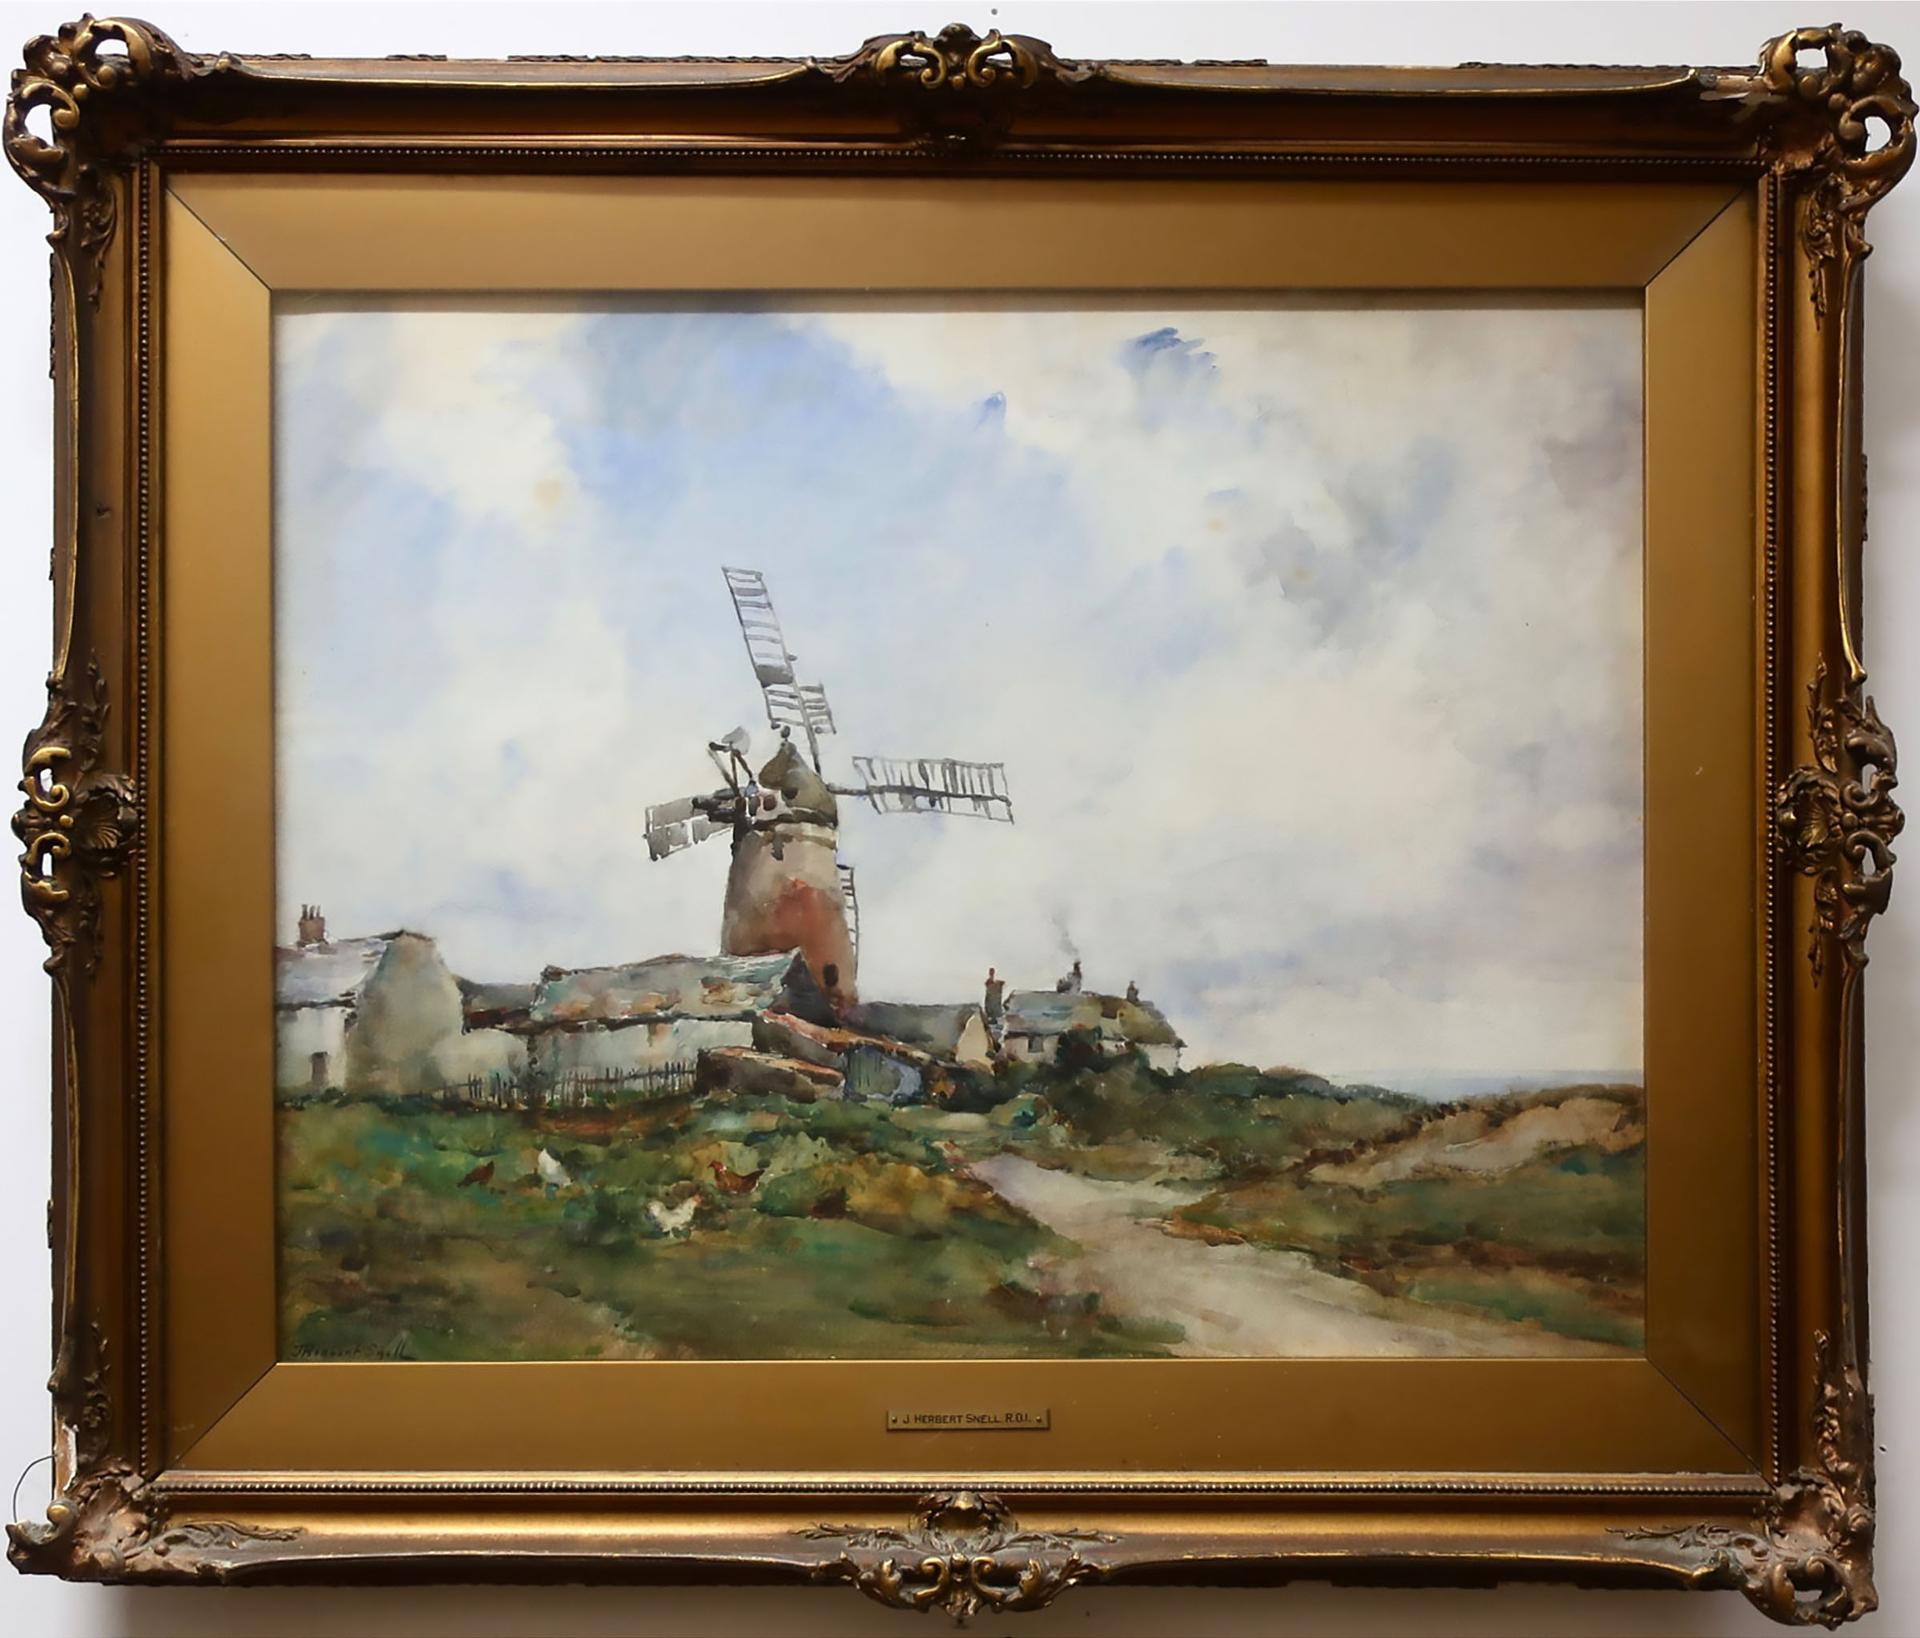 James Herbert Snell (1861-1935) - Untitled (Windmill With Chickens Feeding)